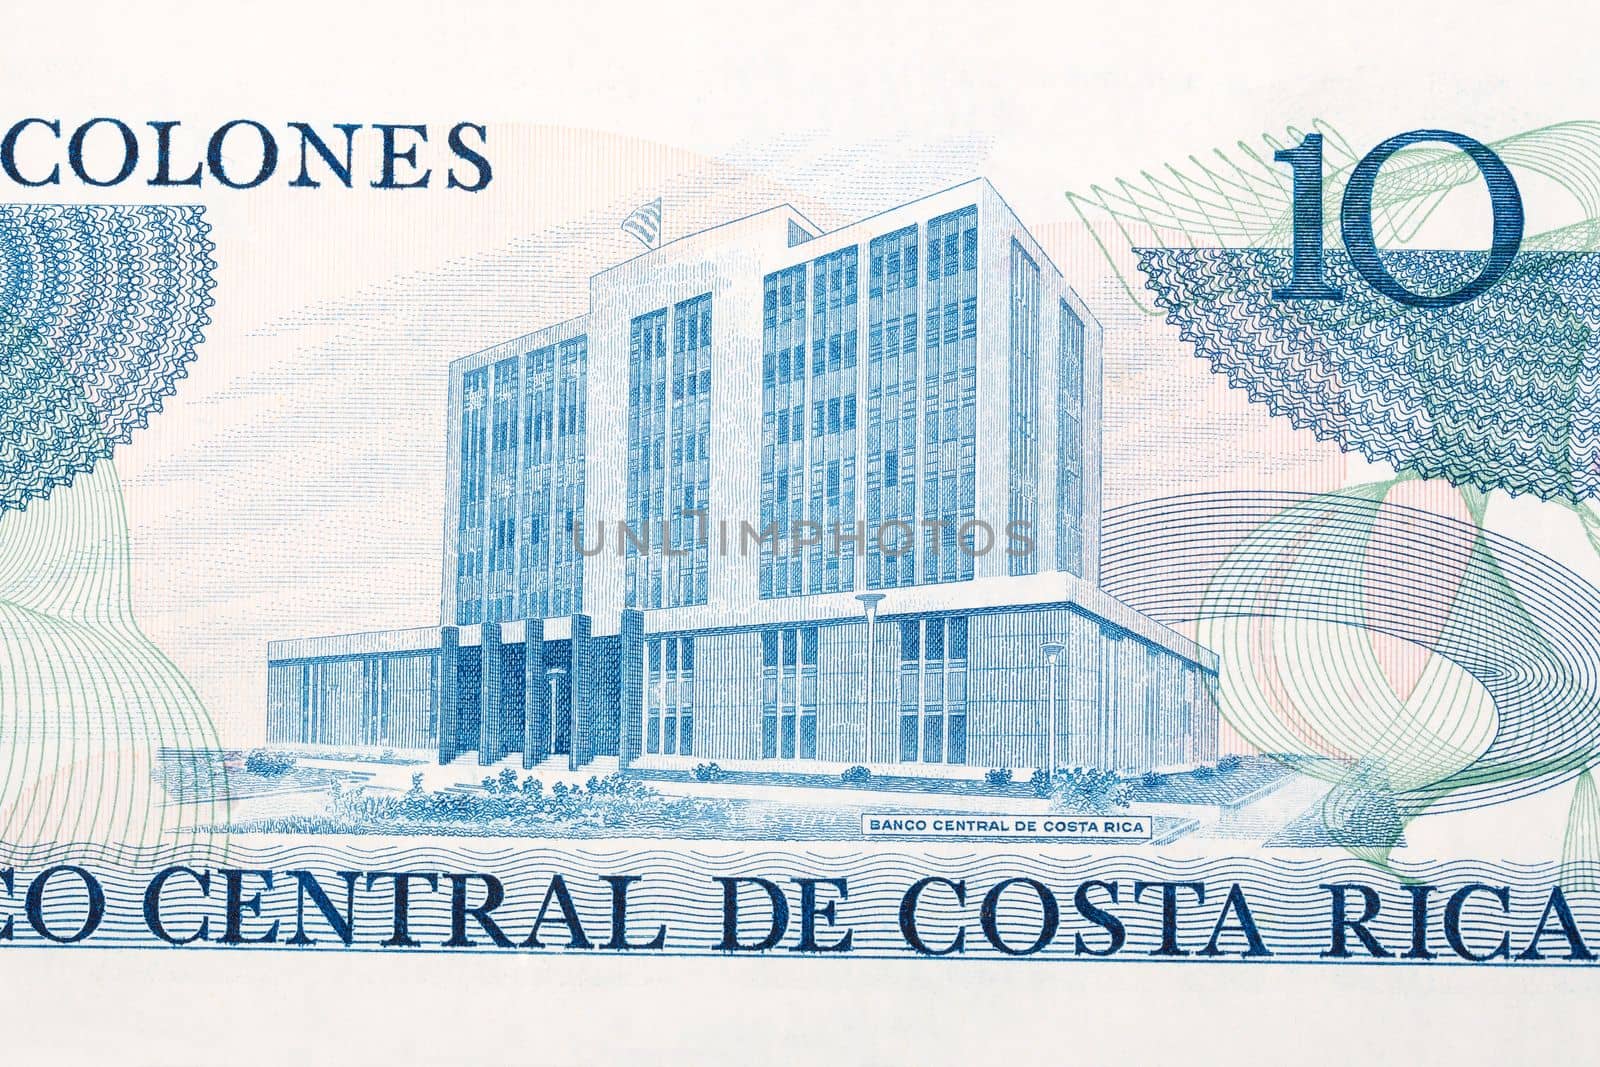 Central bank building from old Costa Rican money by johan10